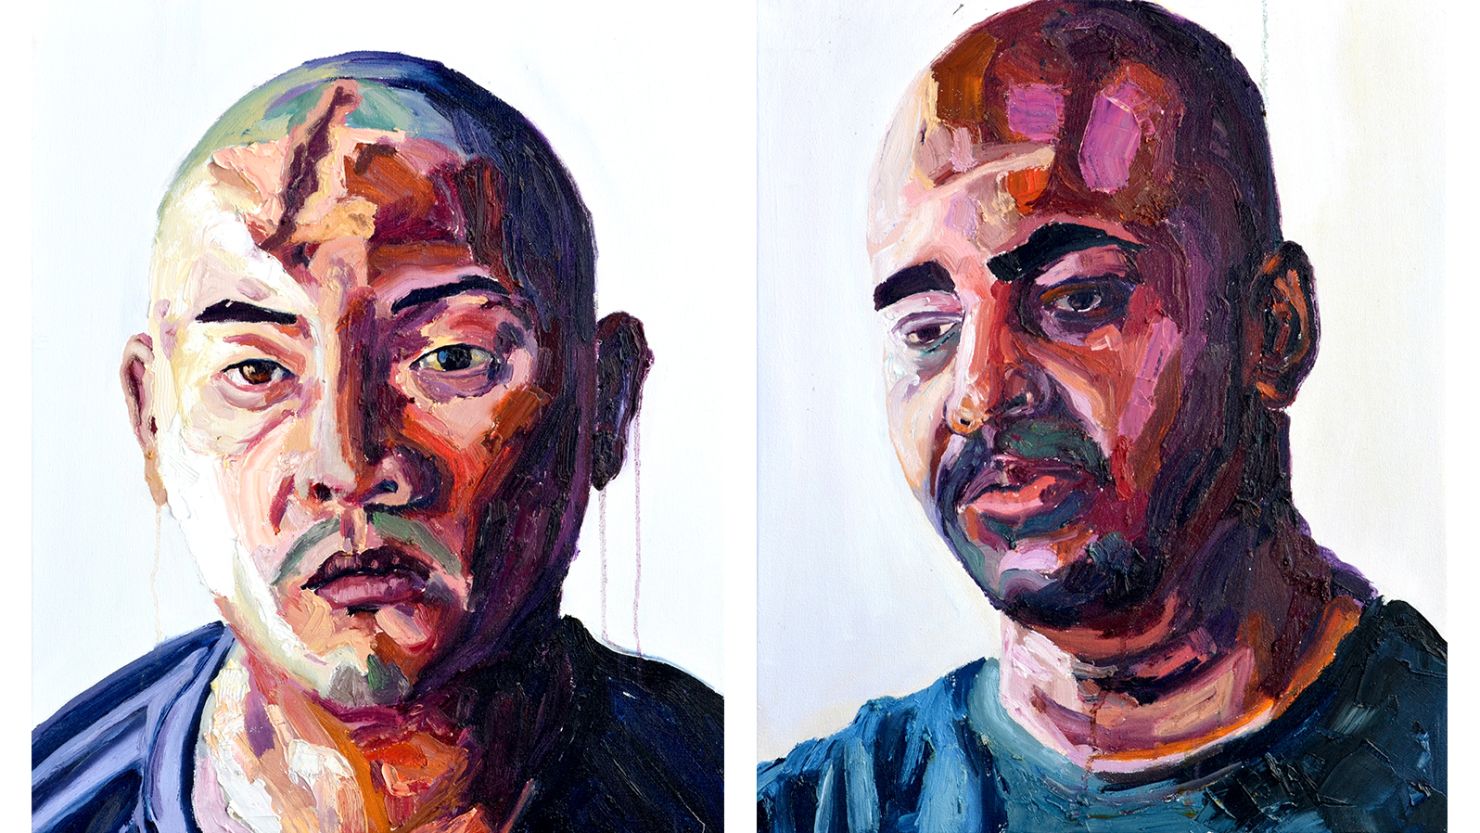 Myuran Sukumaran, who runs art classes for inmates, painted these portraits of Andrew Chan and himself.